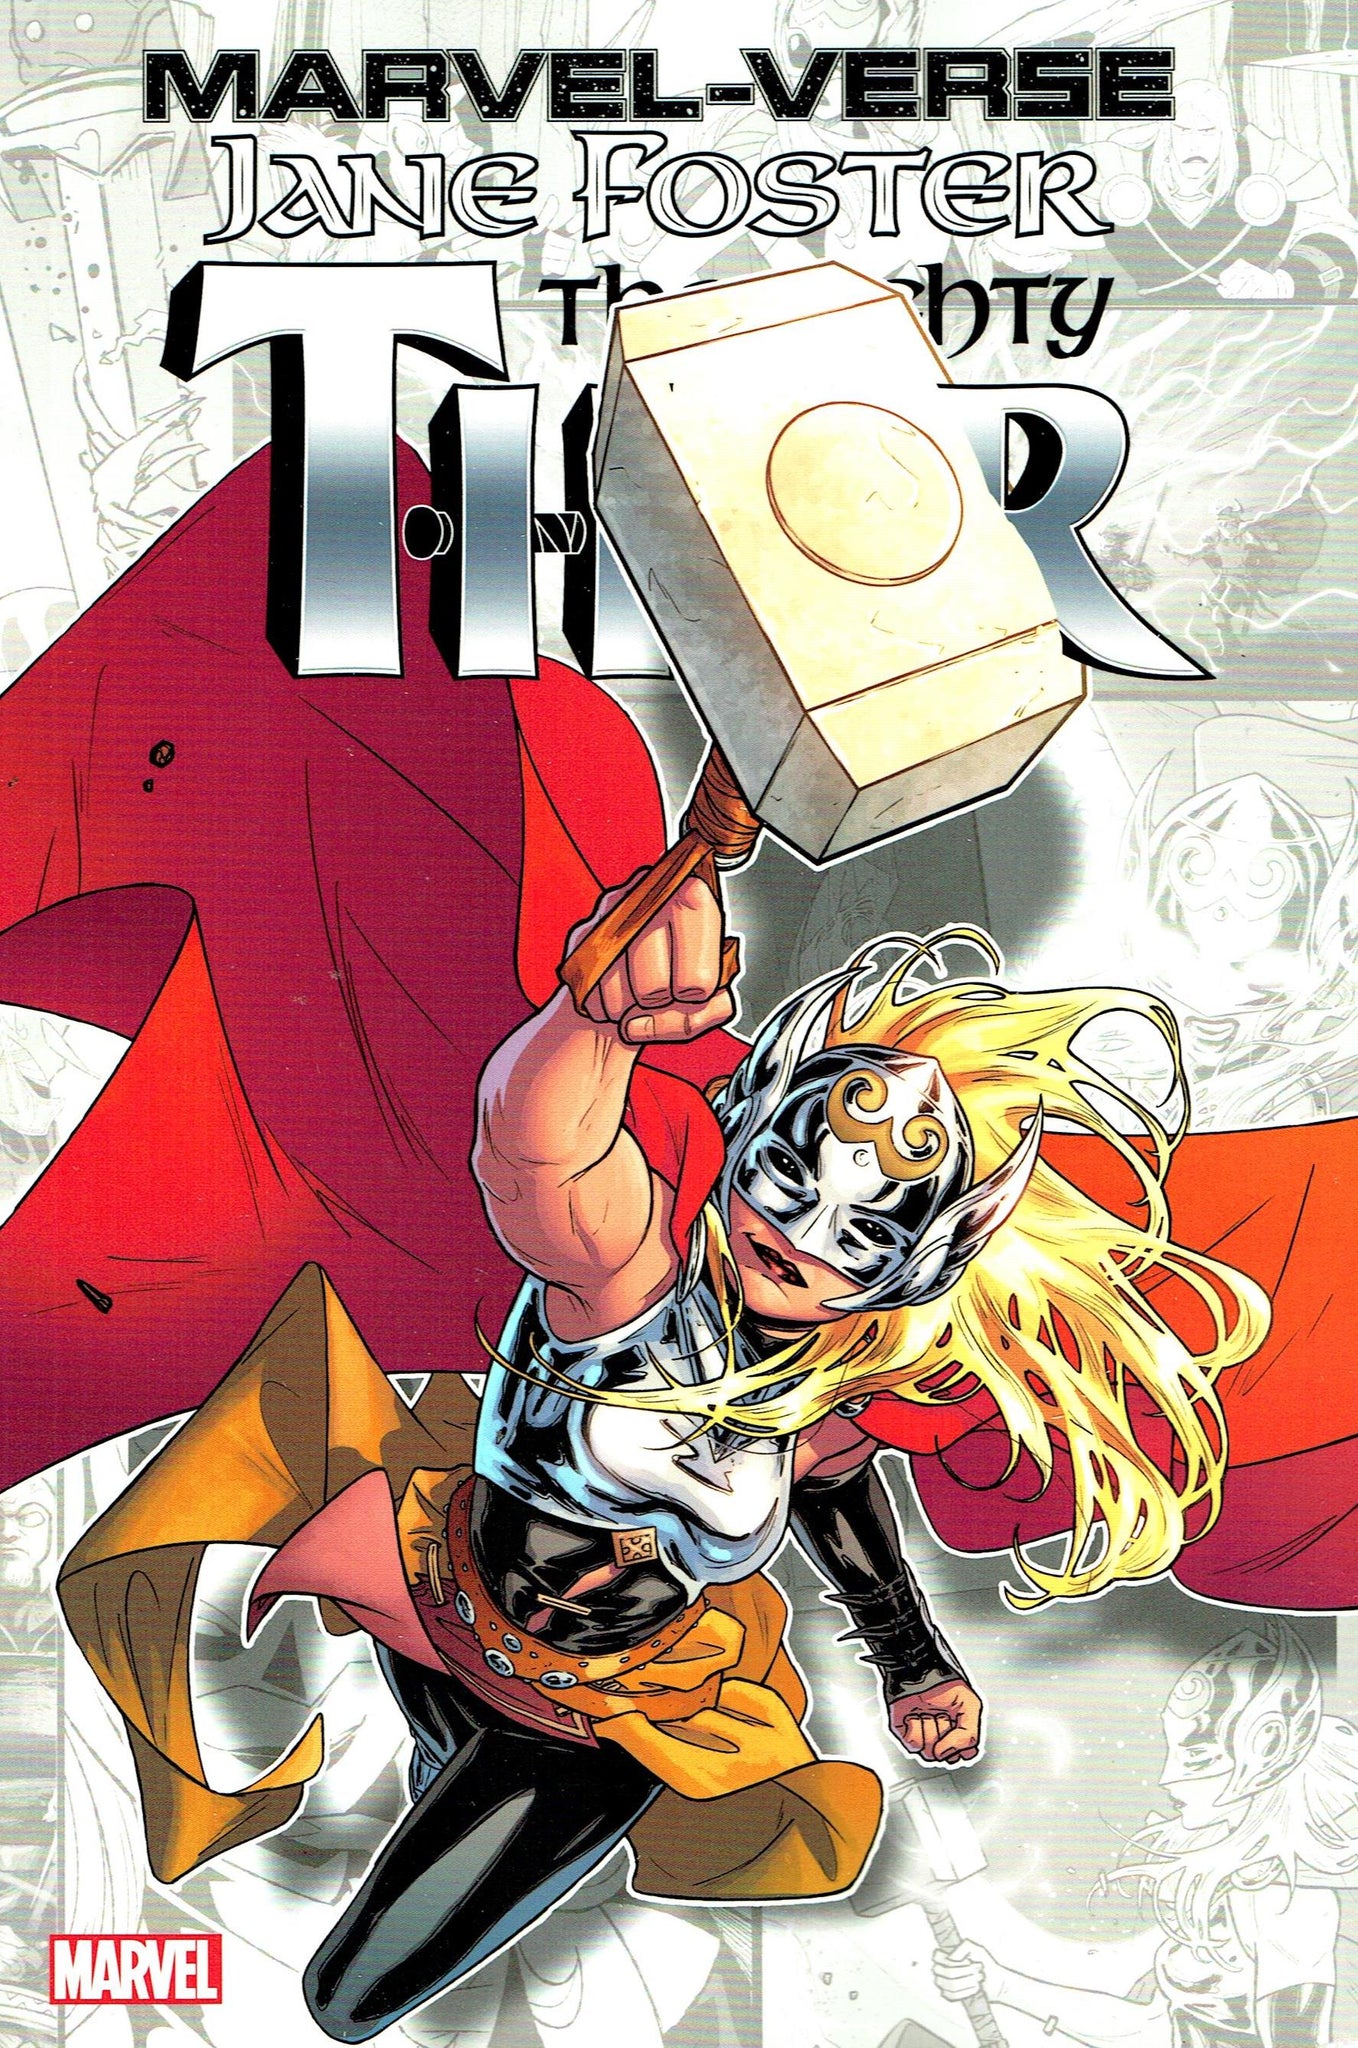 Marvel-Verse: Jane Foster - The Mighty Thor